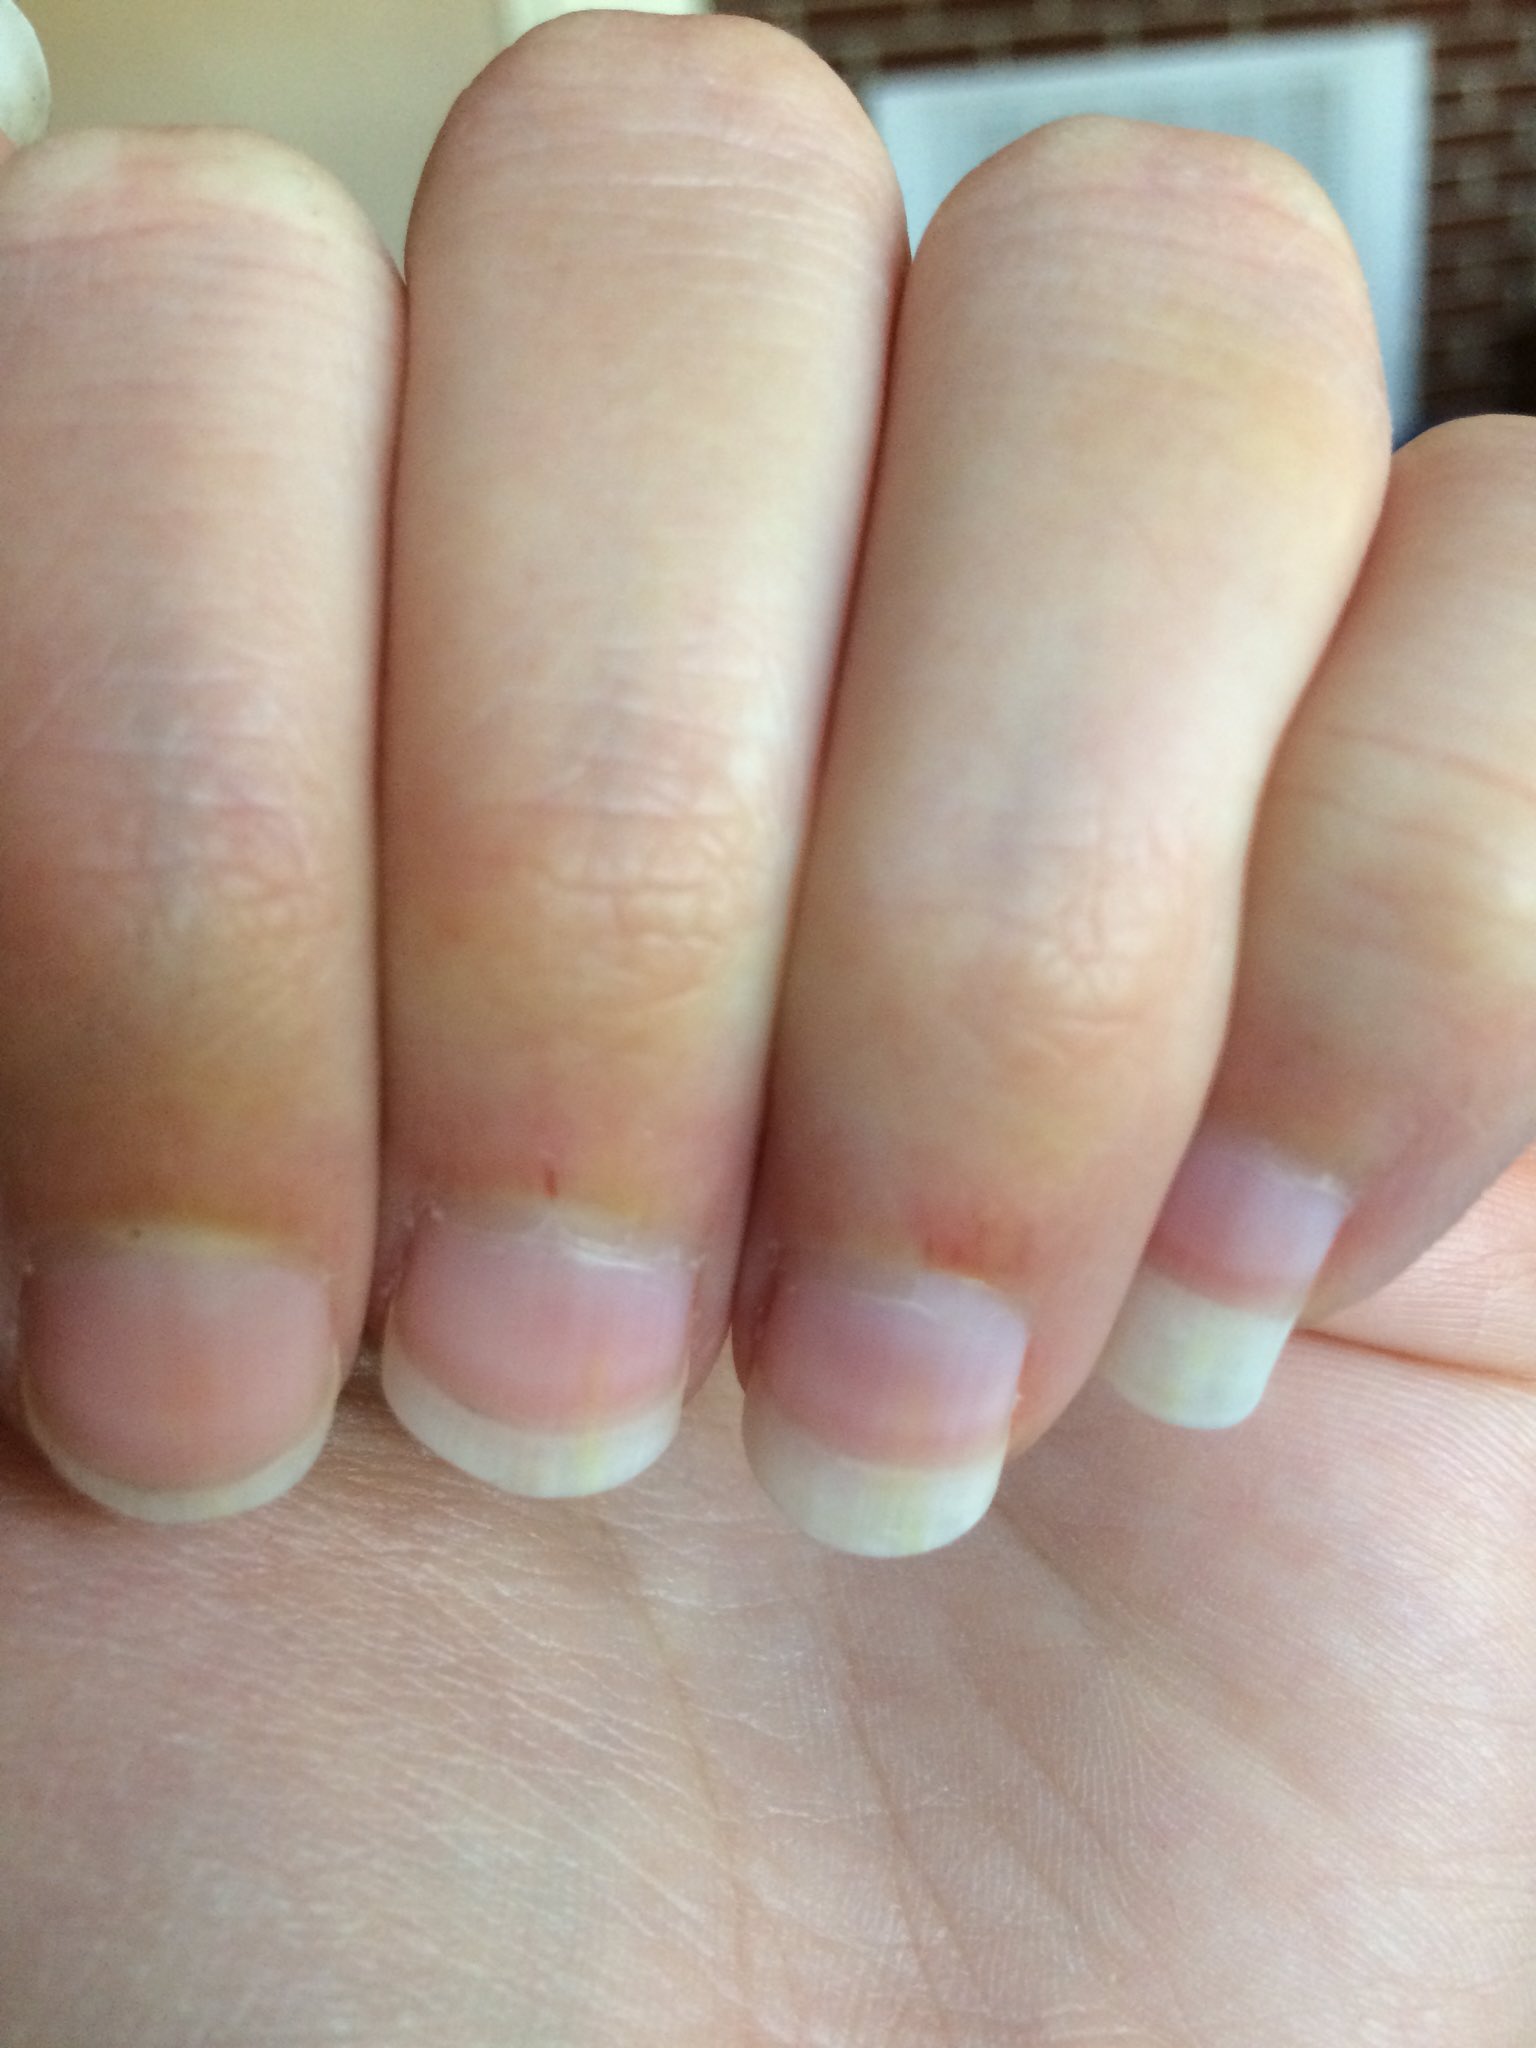 Why are my nails constantly dirty? : r/TheGirlSurvivalGuide